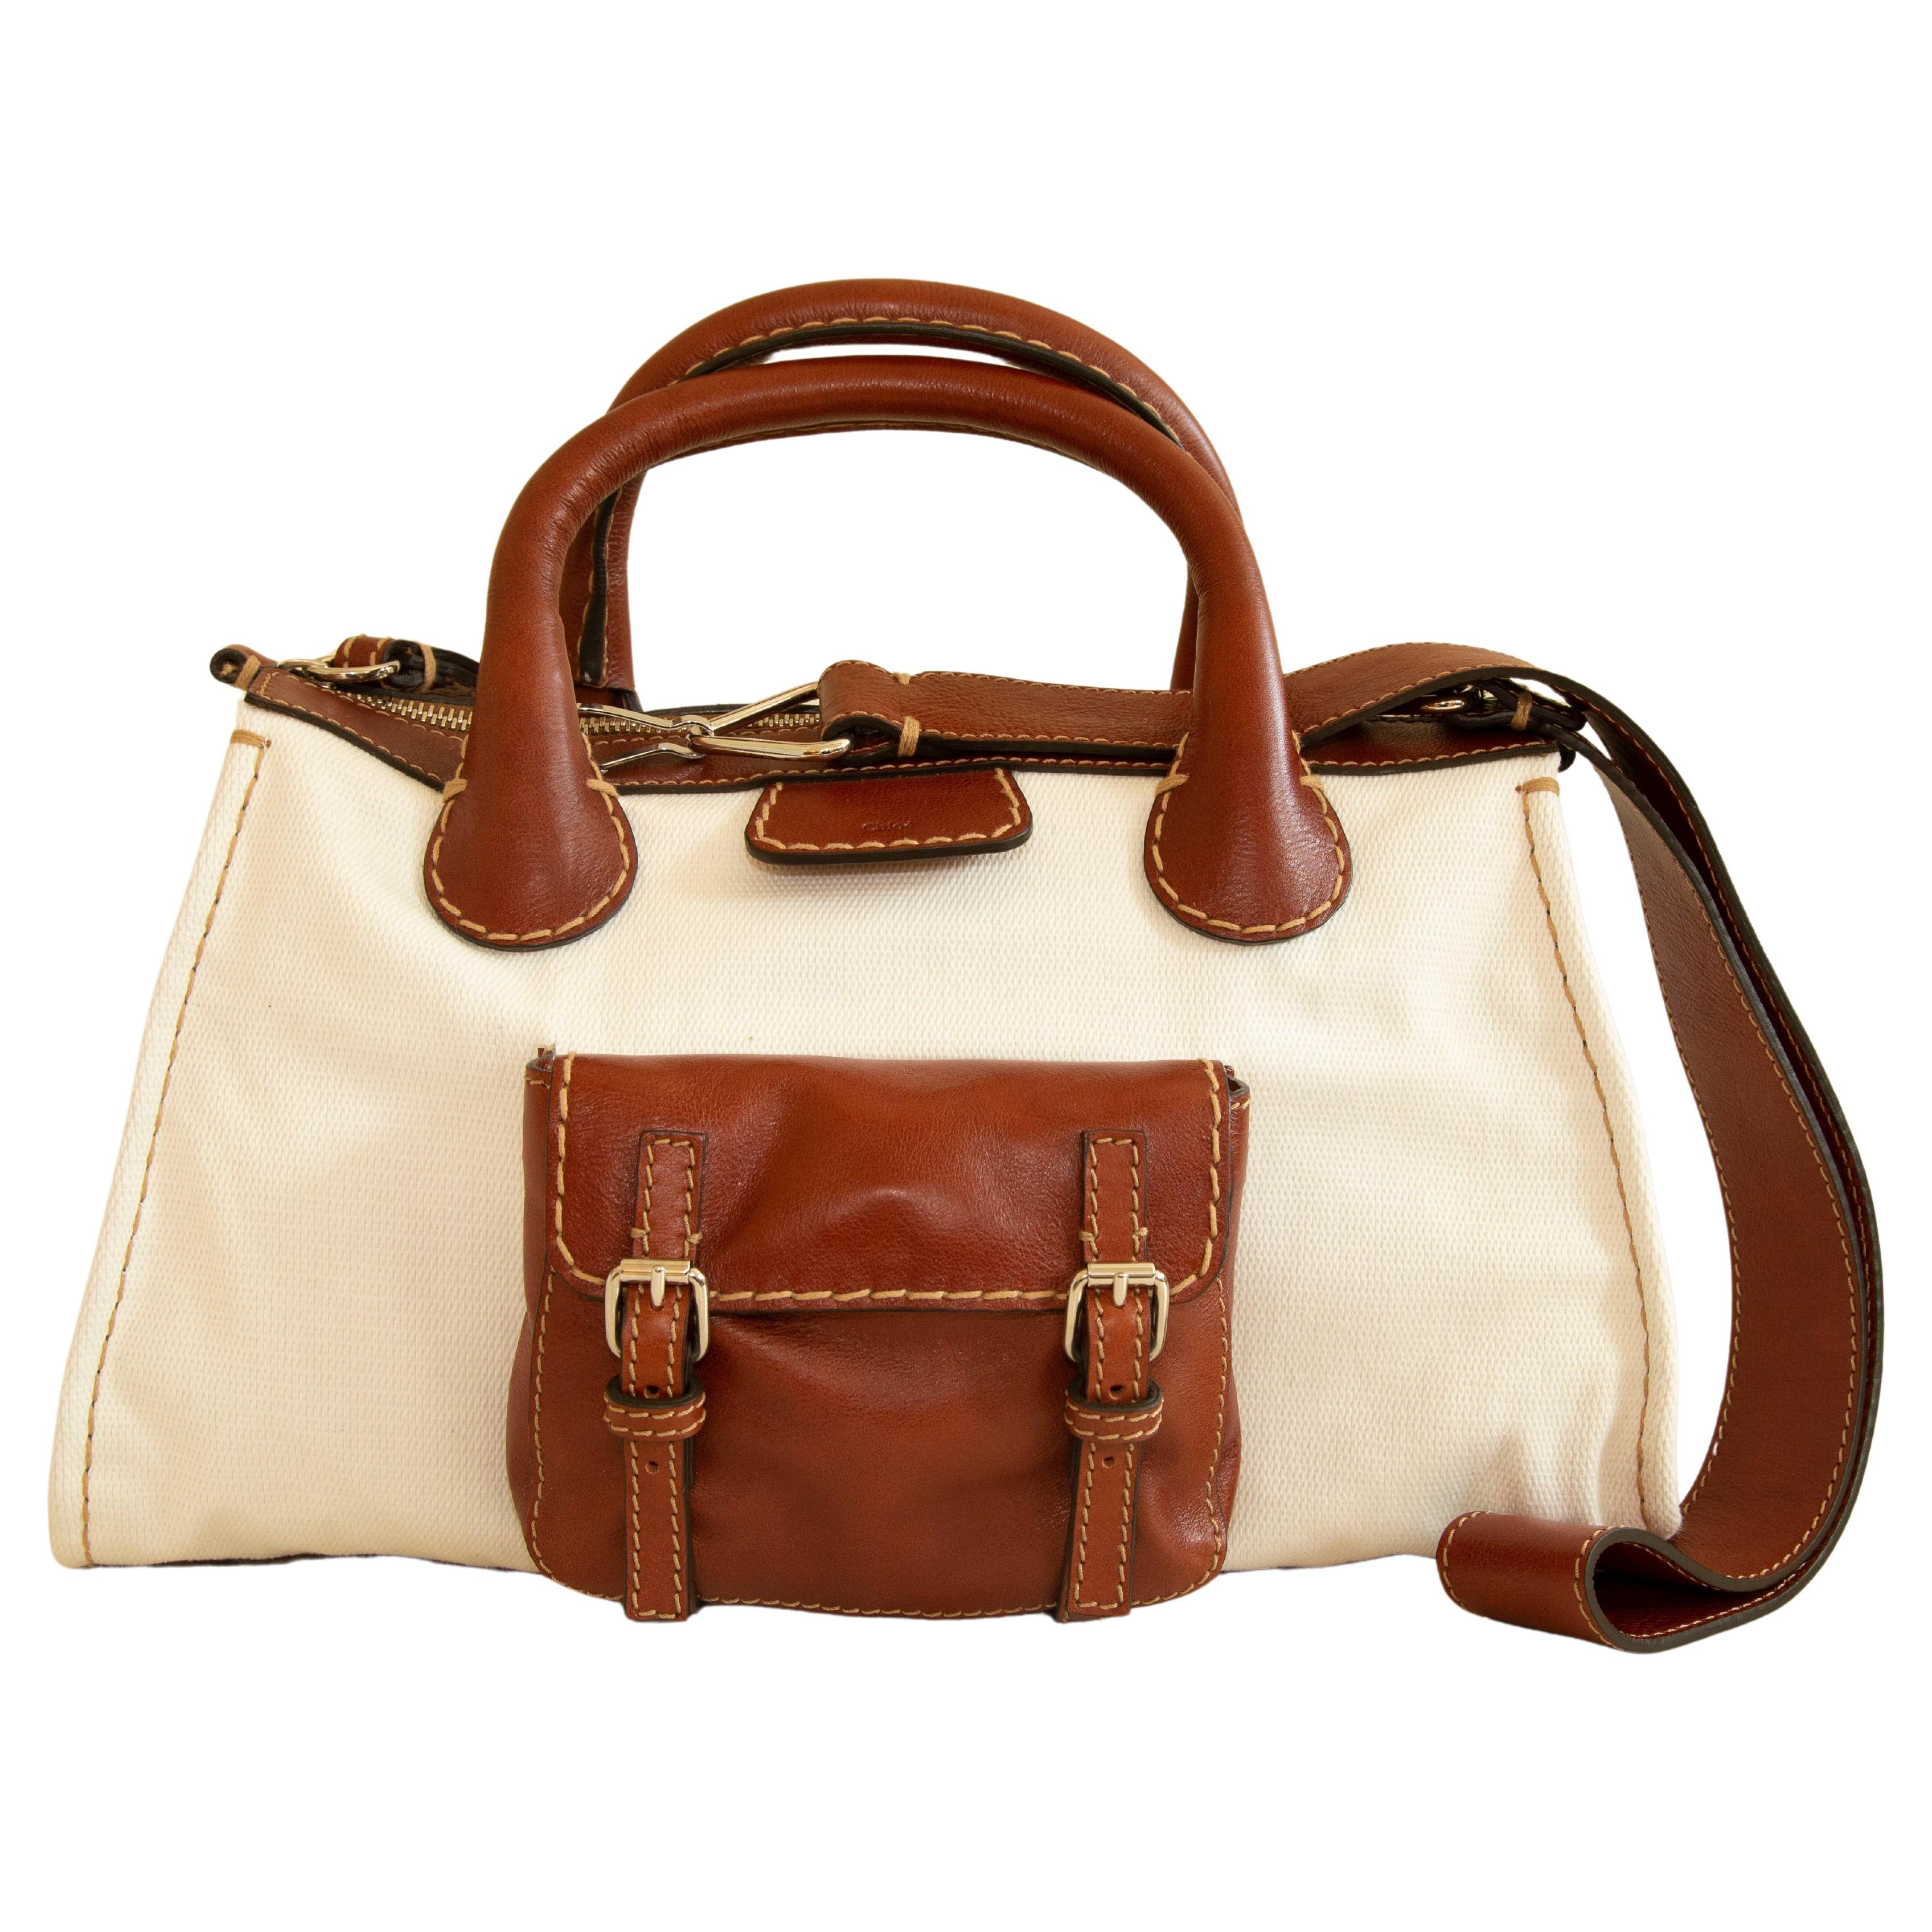 Chloe Edith Medium Tote in White Canvas and Brown Leather For Sale